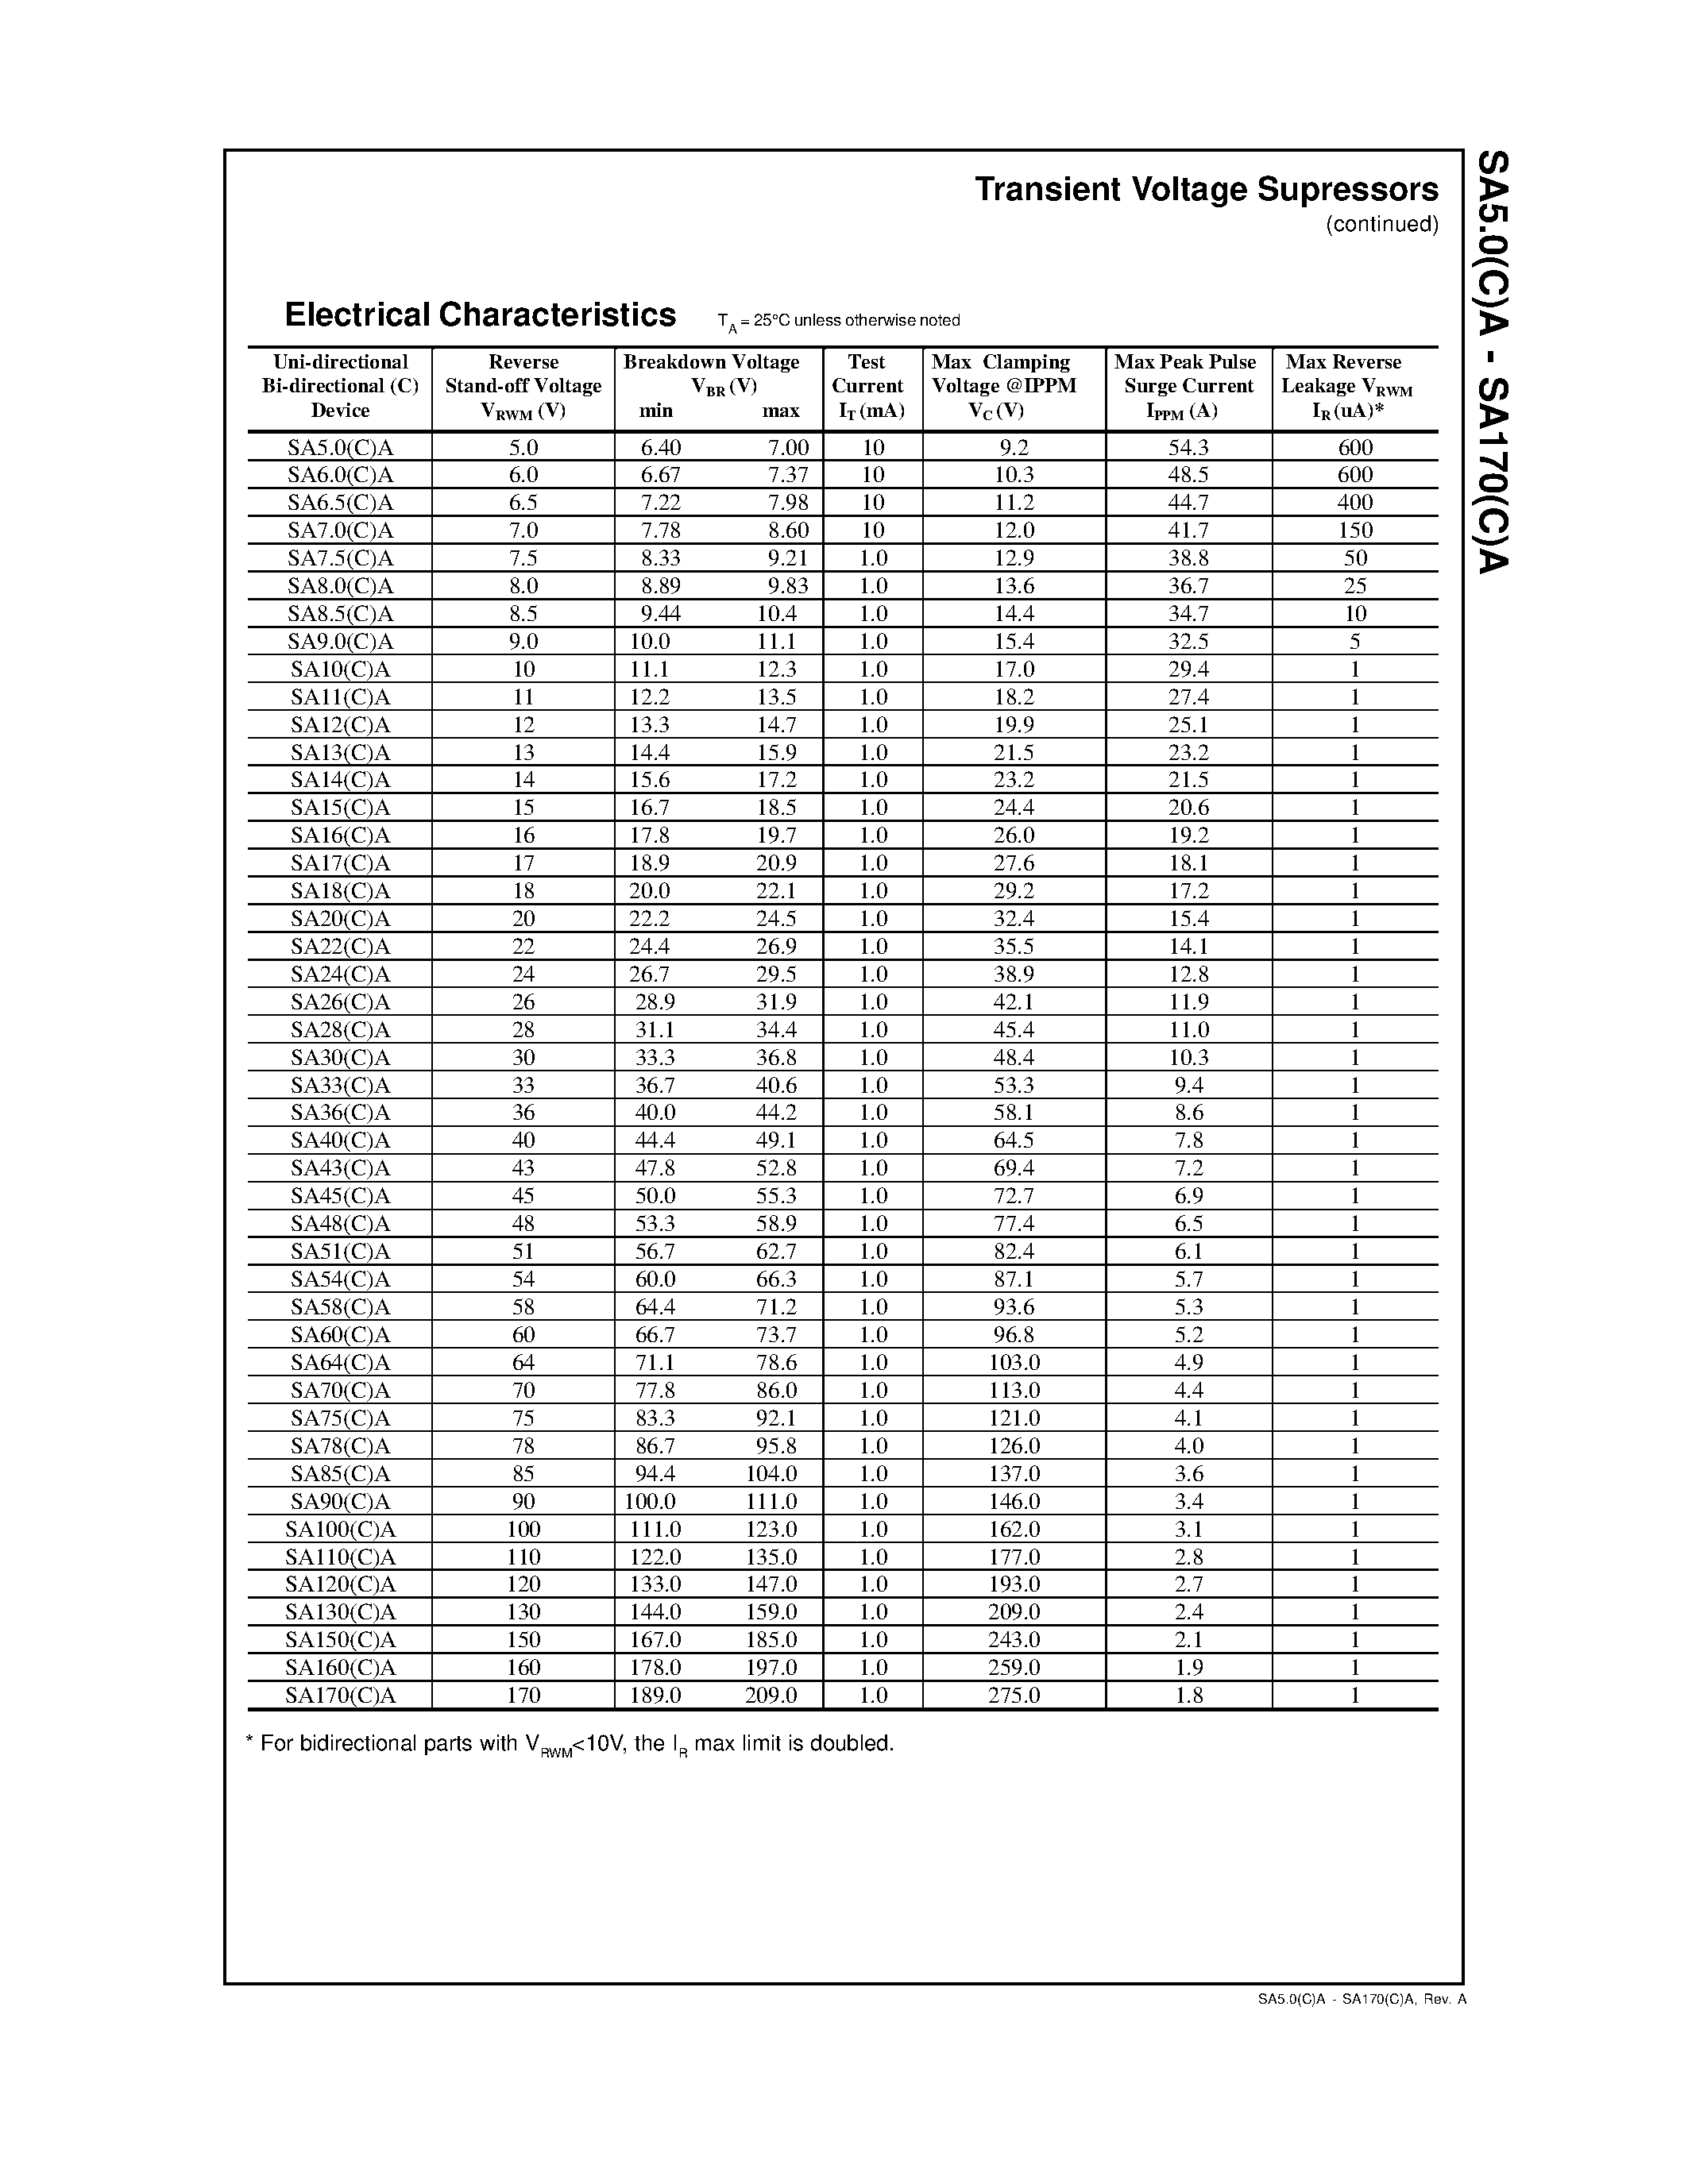 Datasheet SA30(C)A - DEVICES FOR BIPOLAR APPLICATIONS page 2